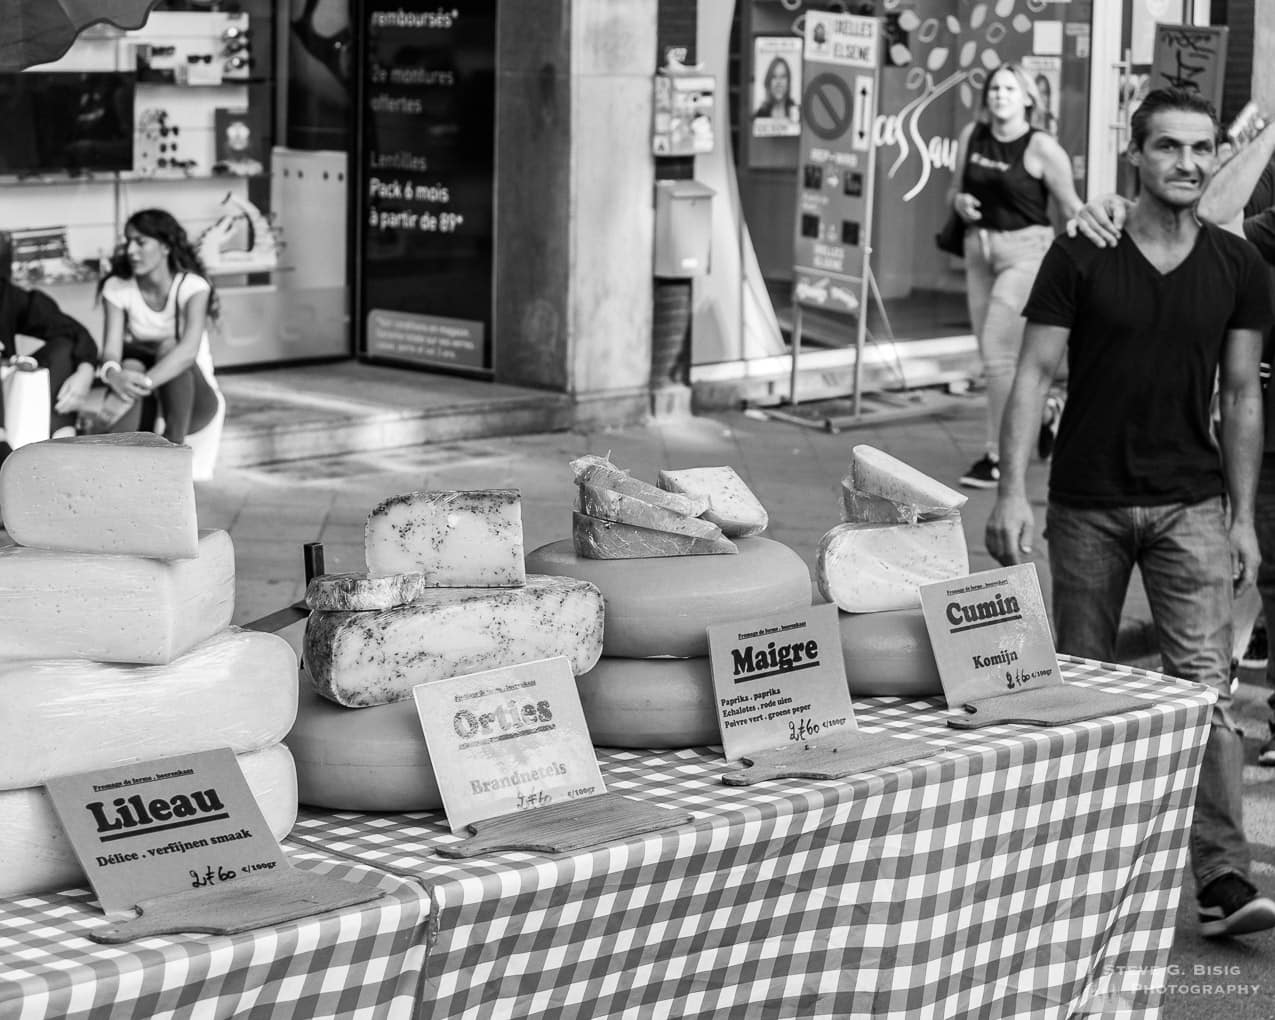 Photo 18/32 of a series of black and white photographs from the 2018 Grande Braderie D'Ixelles sidewalk sale and street festival in Brussels, Belgium.